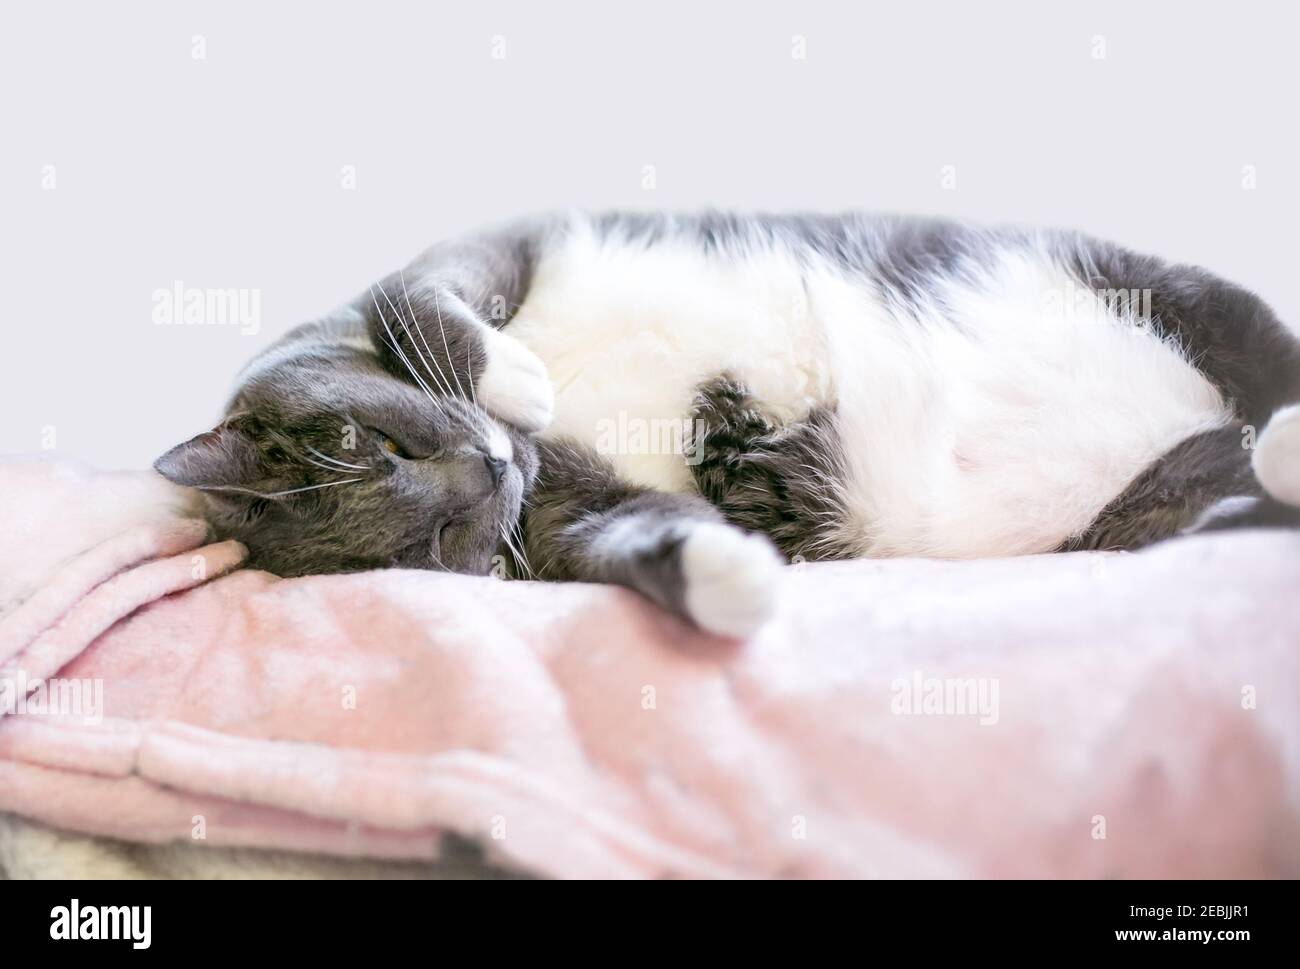 A gray and white shorthair cat napping on a soft blanket Stock Photo